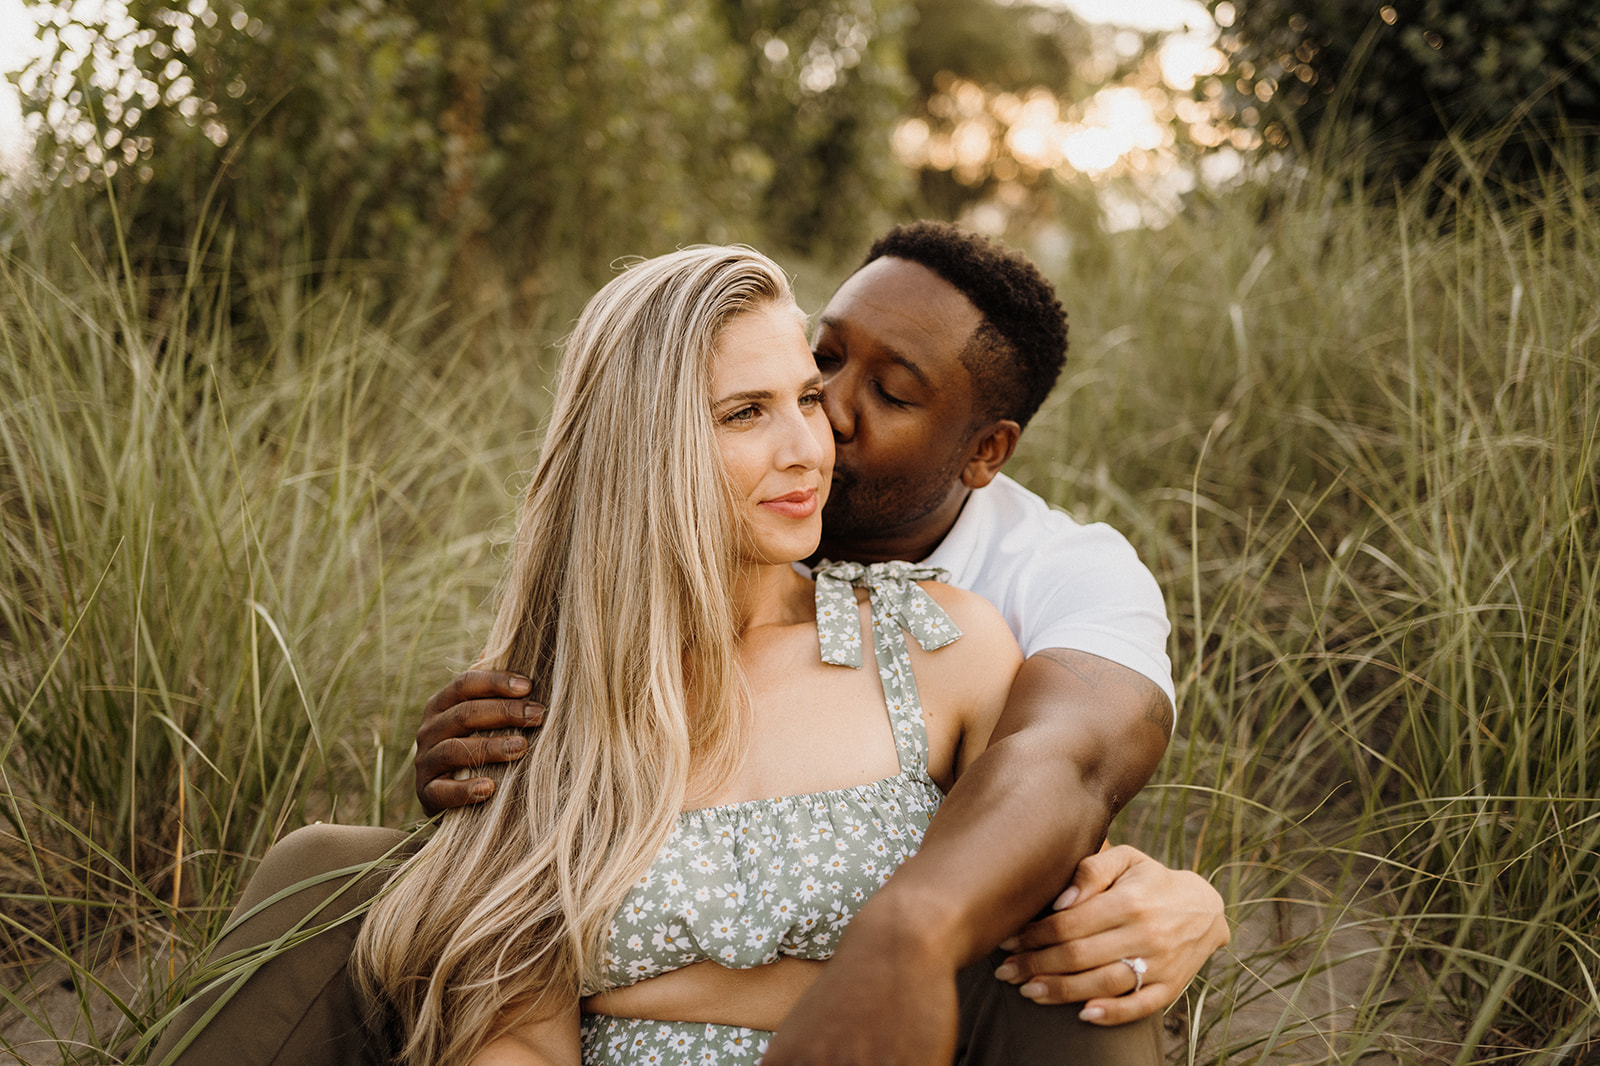 Woman sits in between mans legs on the grass. Man kisses her cheek.